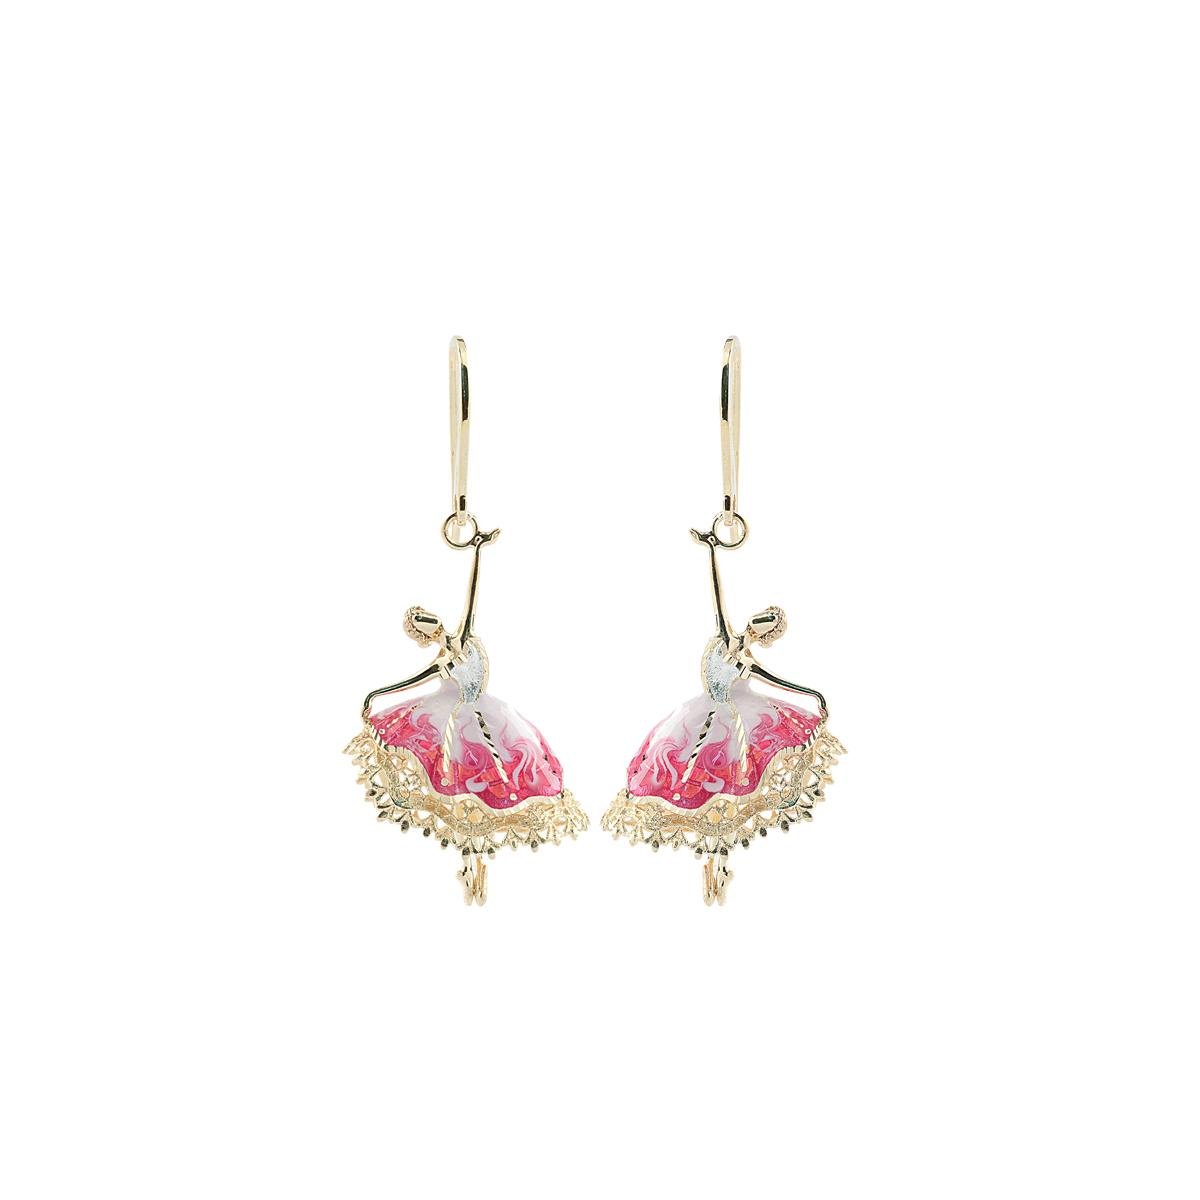 Ballerina earrings in 925 silver, gilded, with hand made pink enamel - ZOR1114-MG